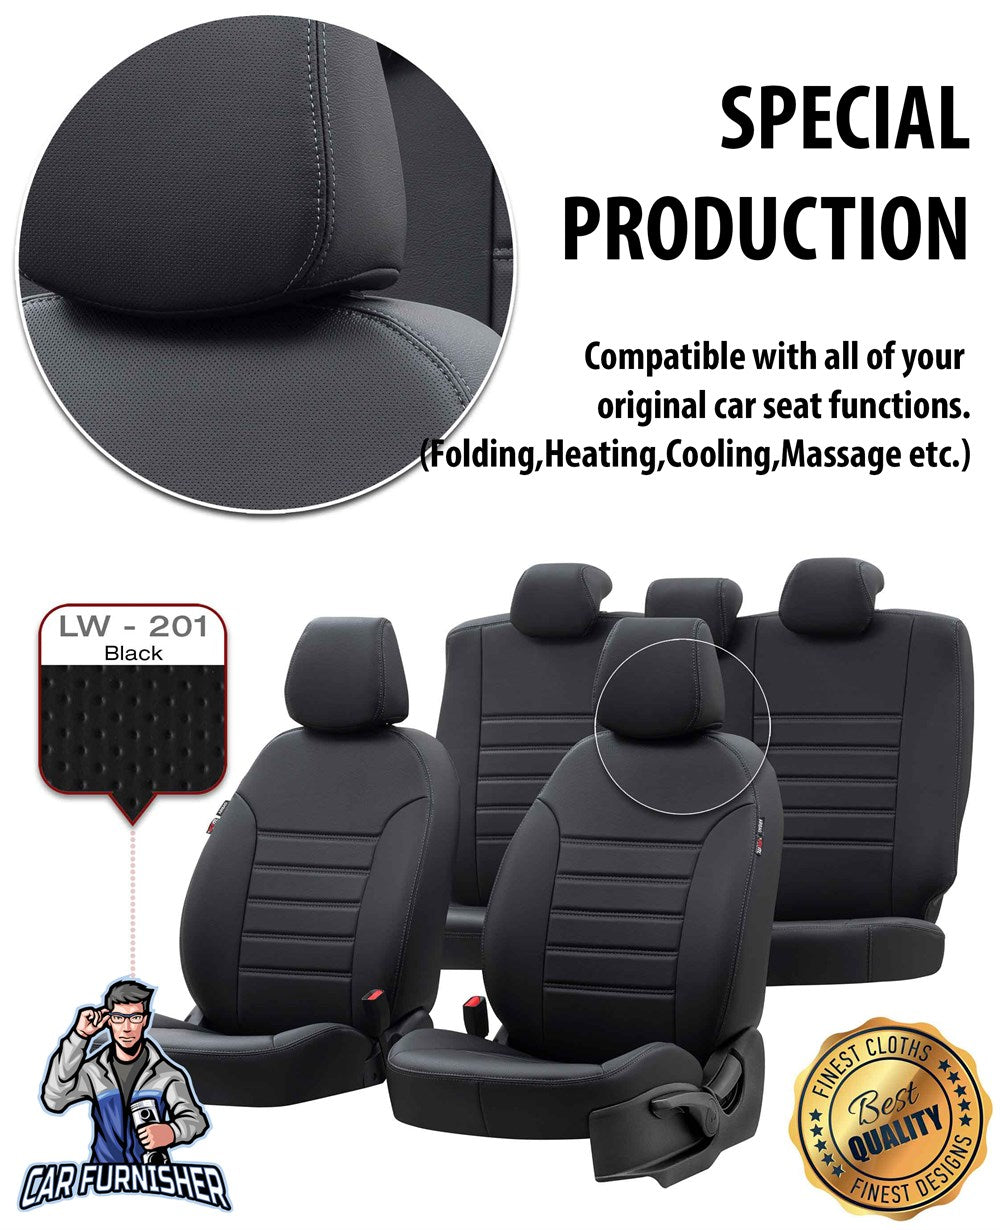 Fiat Stilo Seat Covers Istanbul Leather Design Black Leather